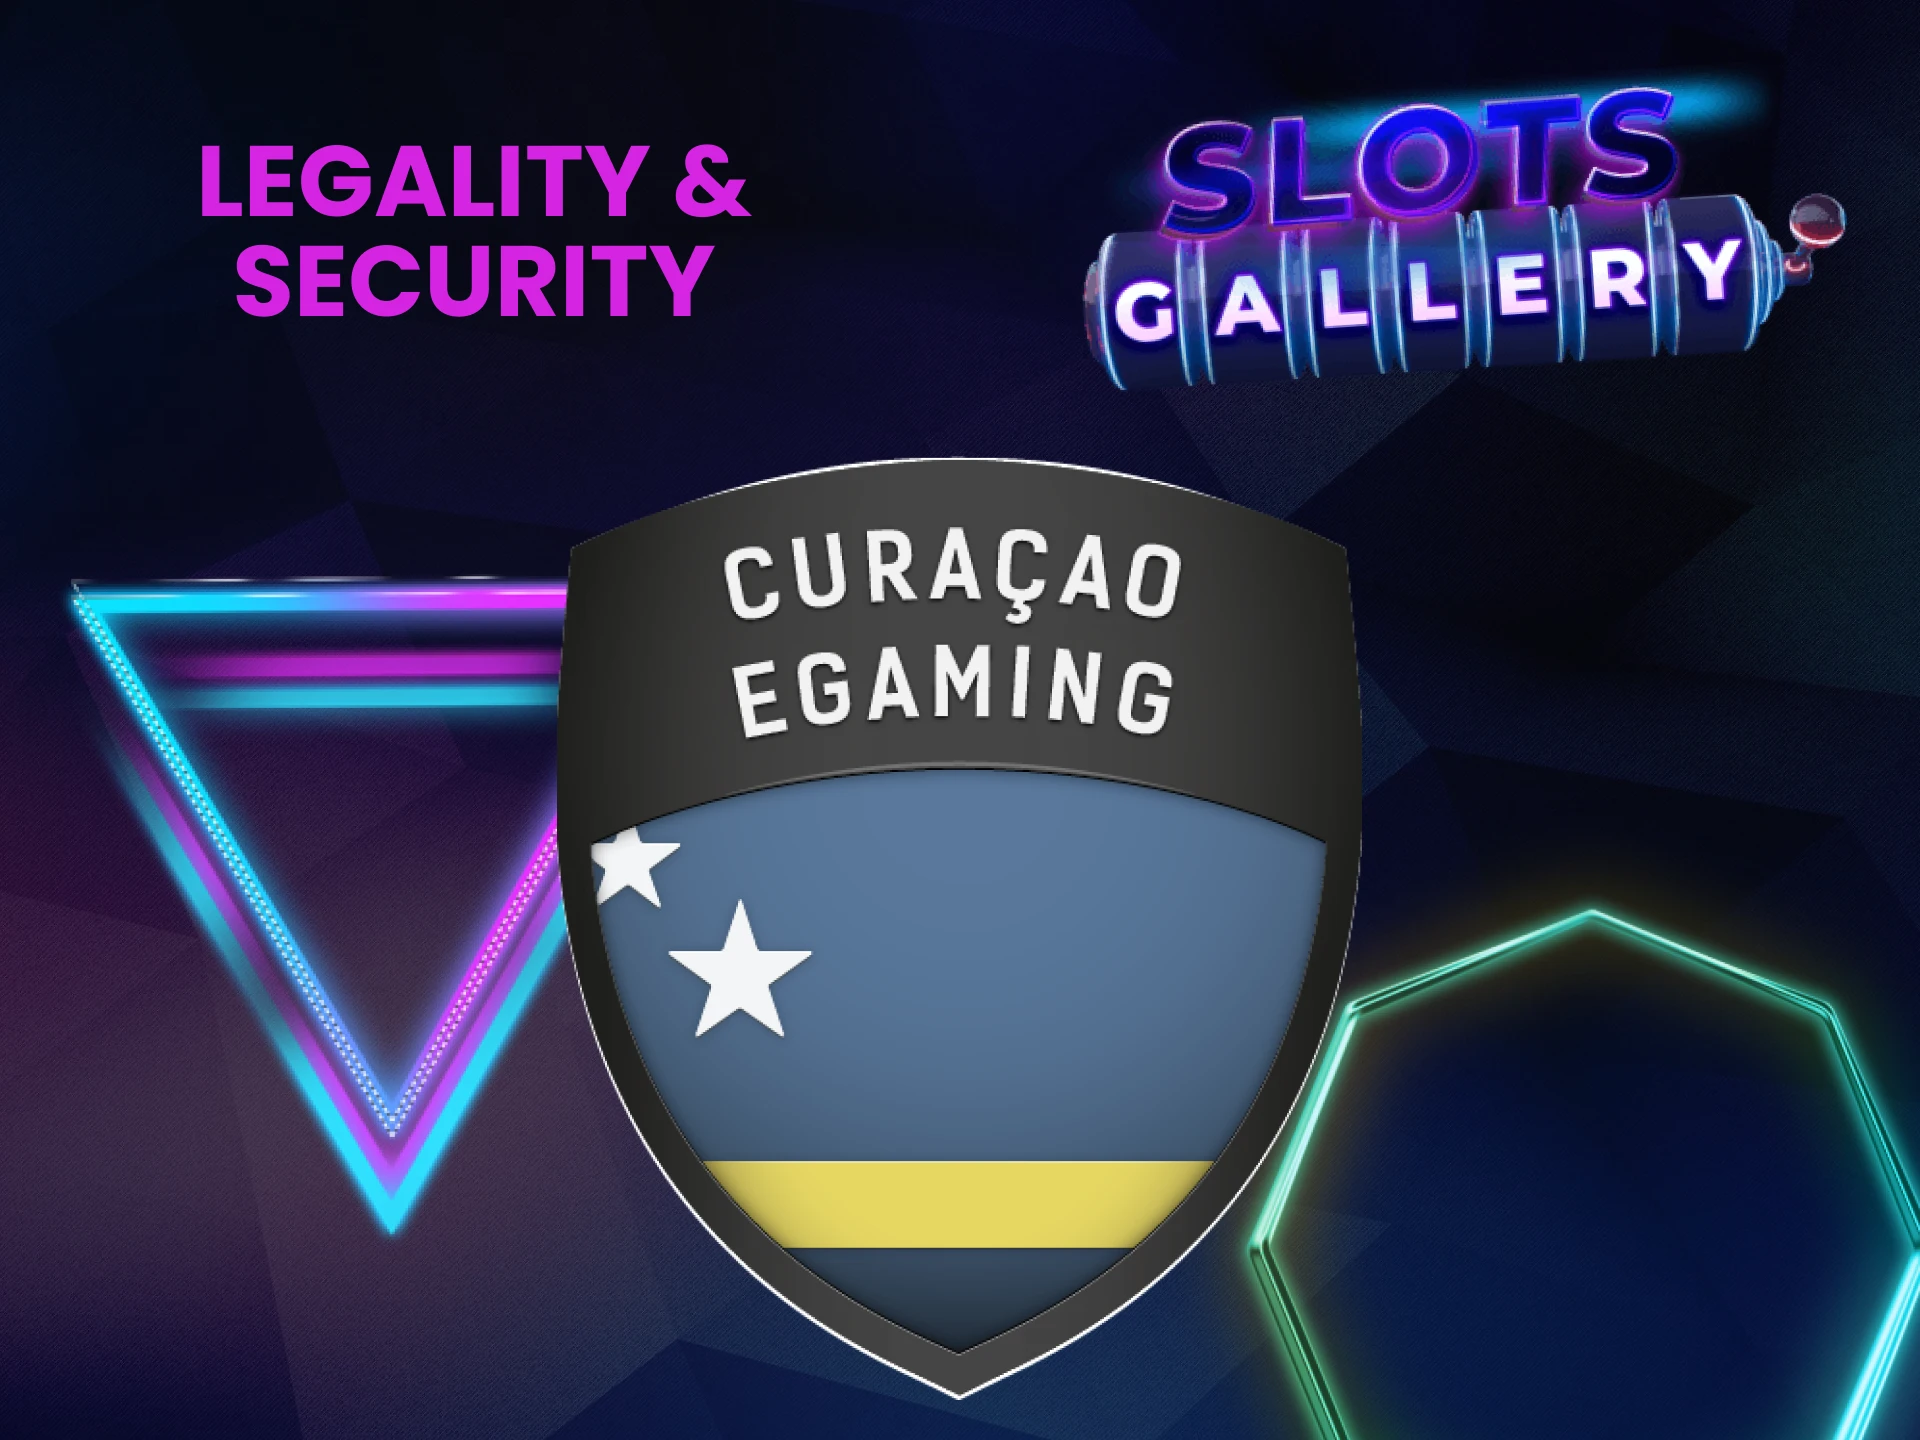 Slots Gallery is safe and has a special license.